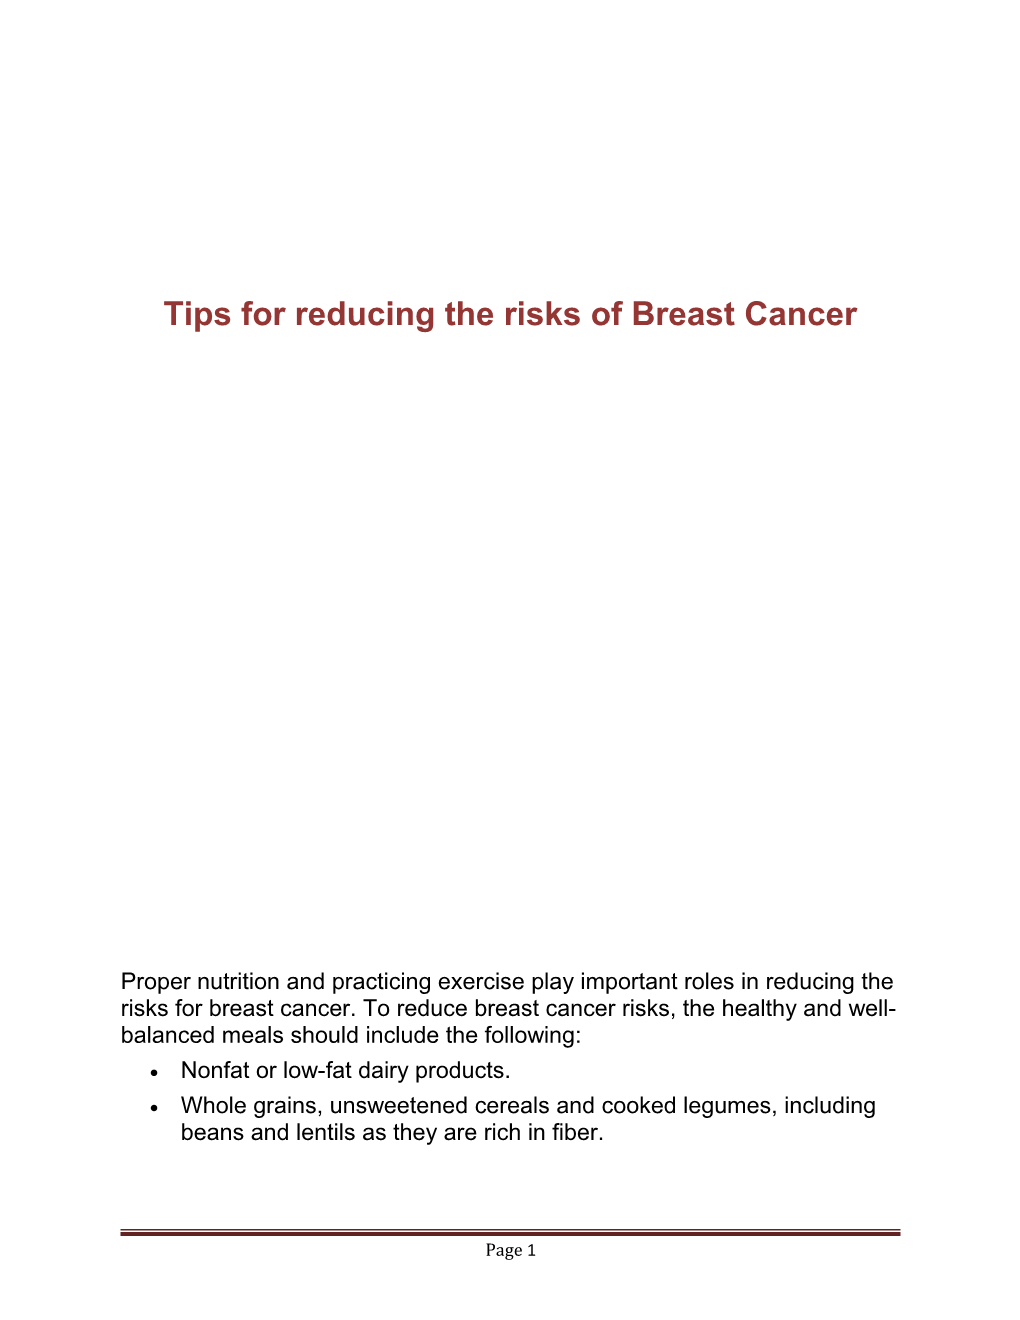 Tips for Reducing the Risks of Breast Cancer